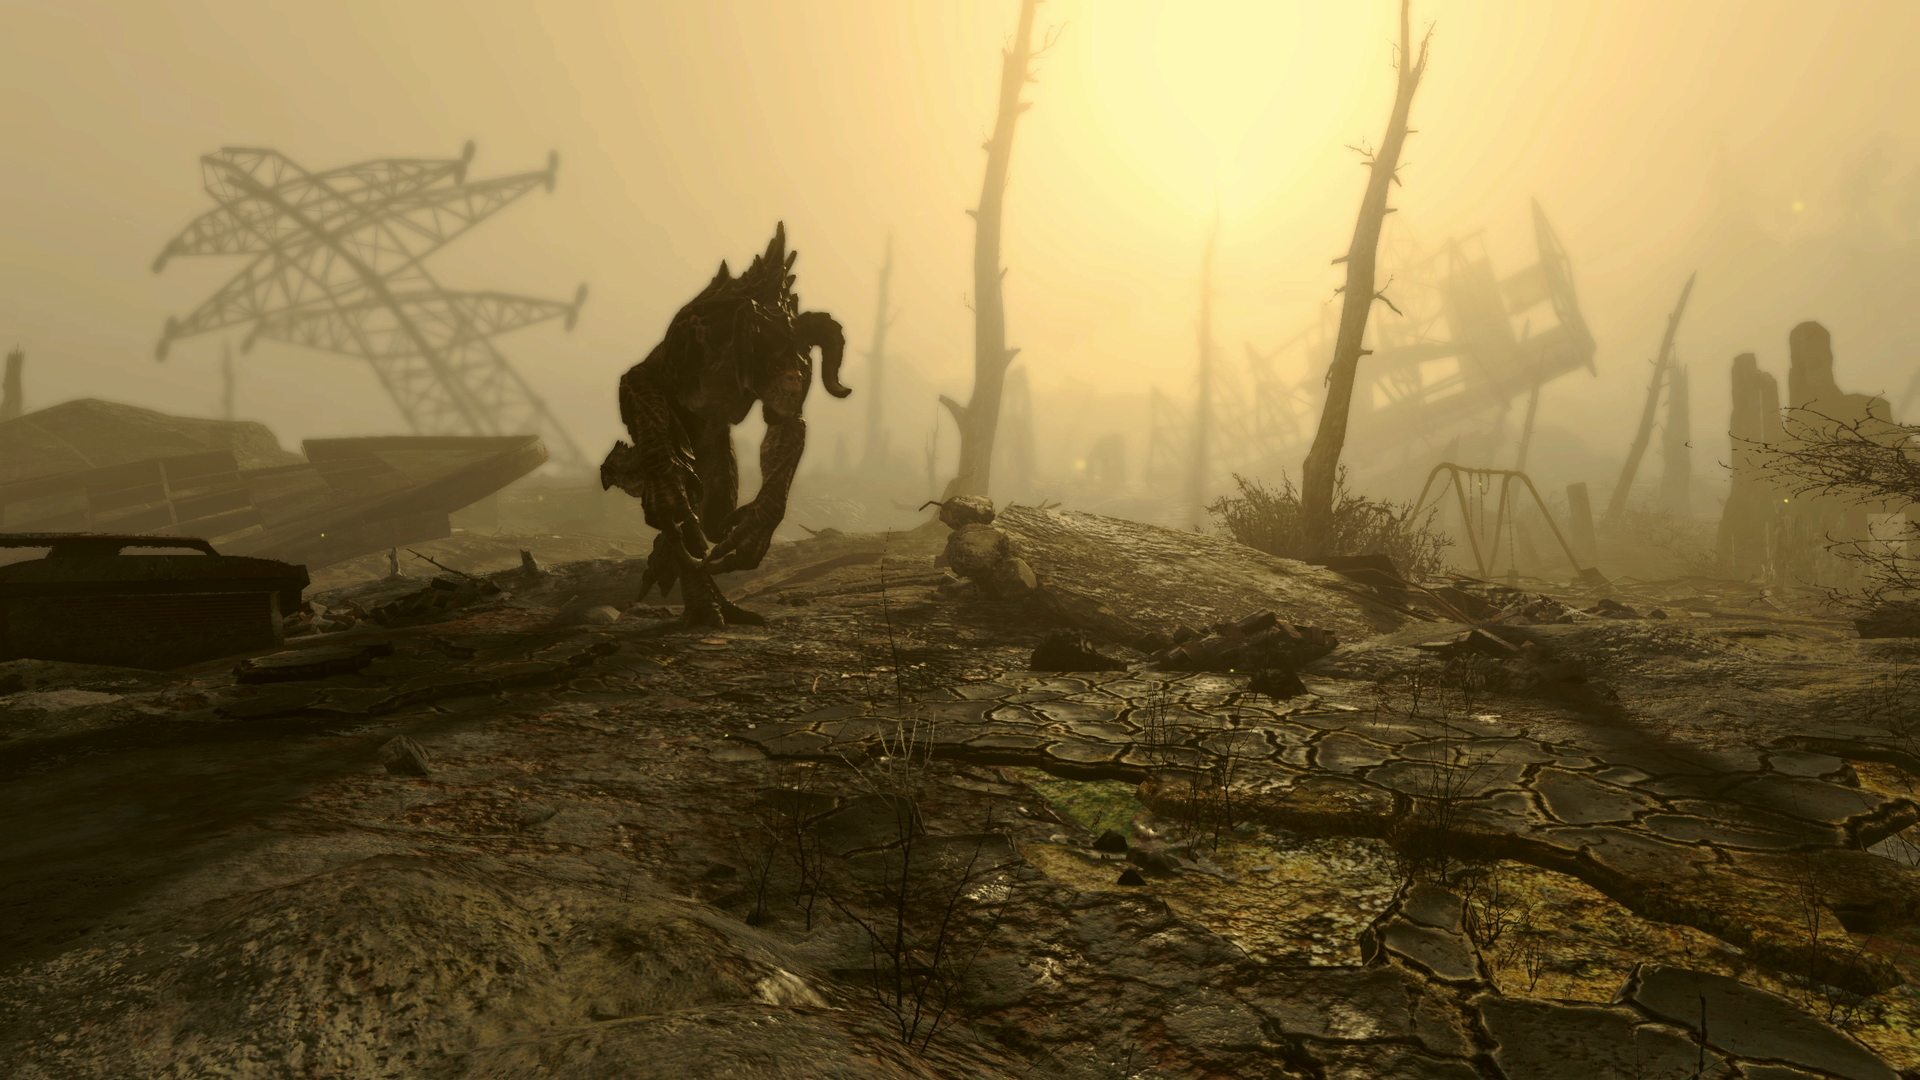 Media asset in full size related to 3dfxzone.it news item entitled as follows: Primi trailer e screenshot ufficiali in Full HD del game Fallout 4 di Bethesda | Image Name: news22682_Bethesda-Fallout-4-screenshot_7.png